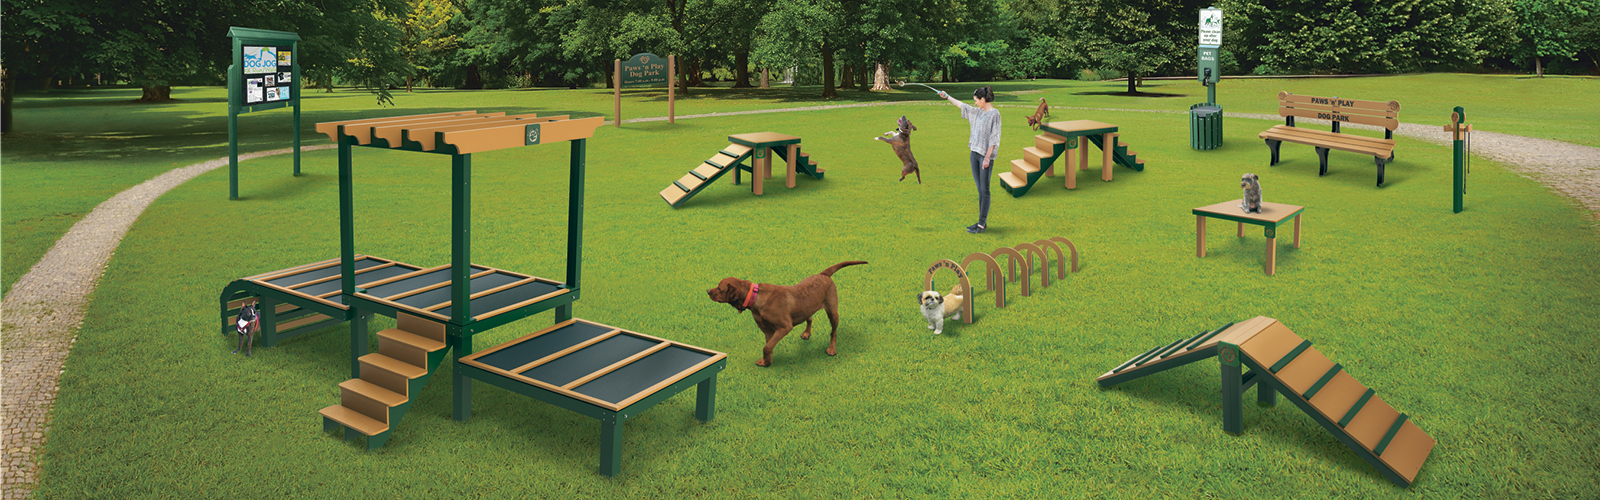 Pet Playgrounds: Clearing Land for Pet Parks